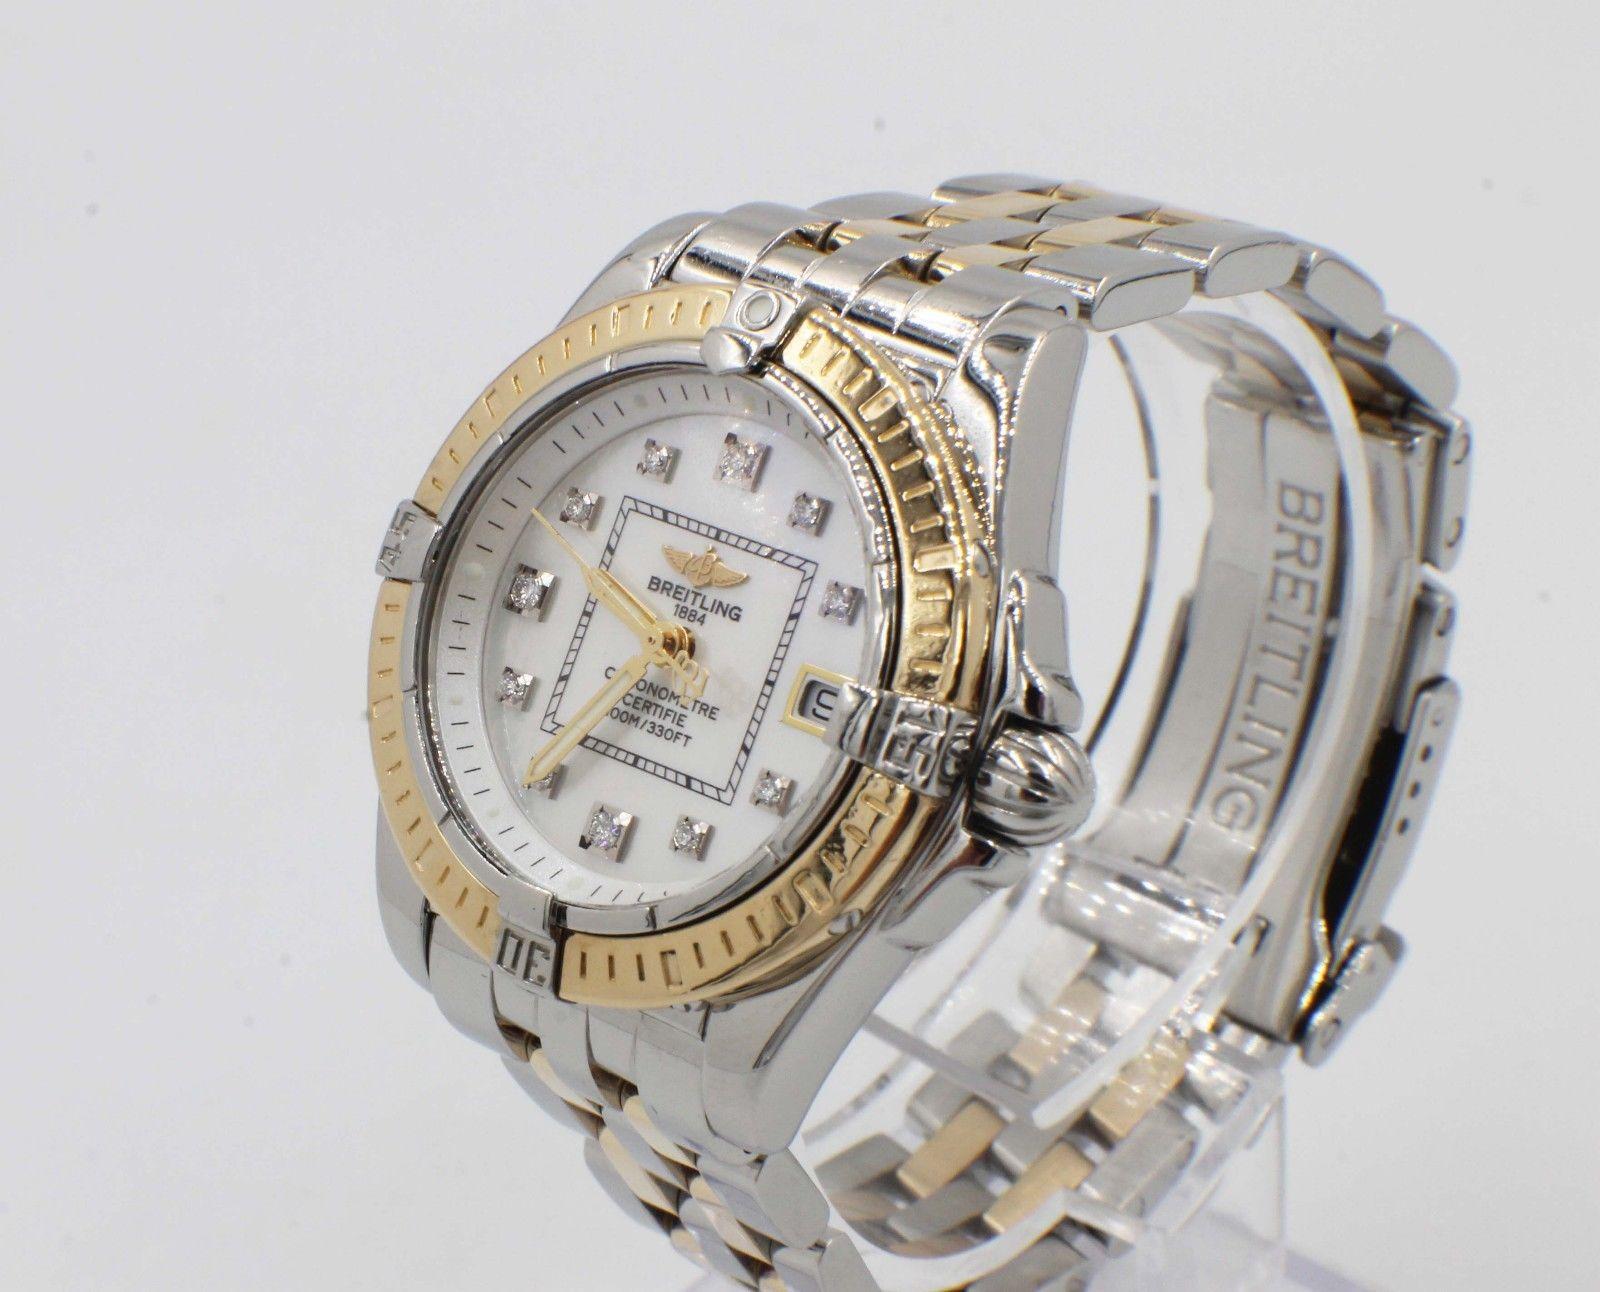 Style Number: D71356

Model: Cockpit 

Case Material: Stainless Steel

Band: 18K Yellow Gold & Stainless Steel

Bezel:  18K Yellow Gold

Dial: Mother of Pearl Diamond Dial 

Face: Sapphire Crystal 

Case Size: 32mm

Includes: 

-Breitling Box &